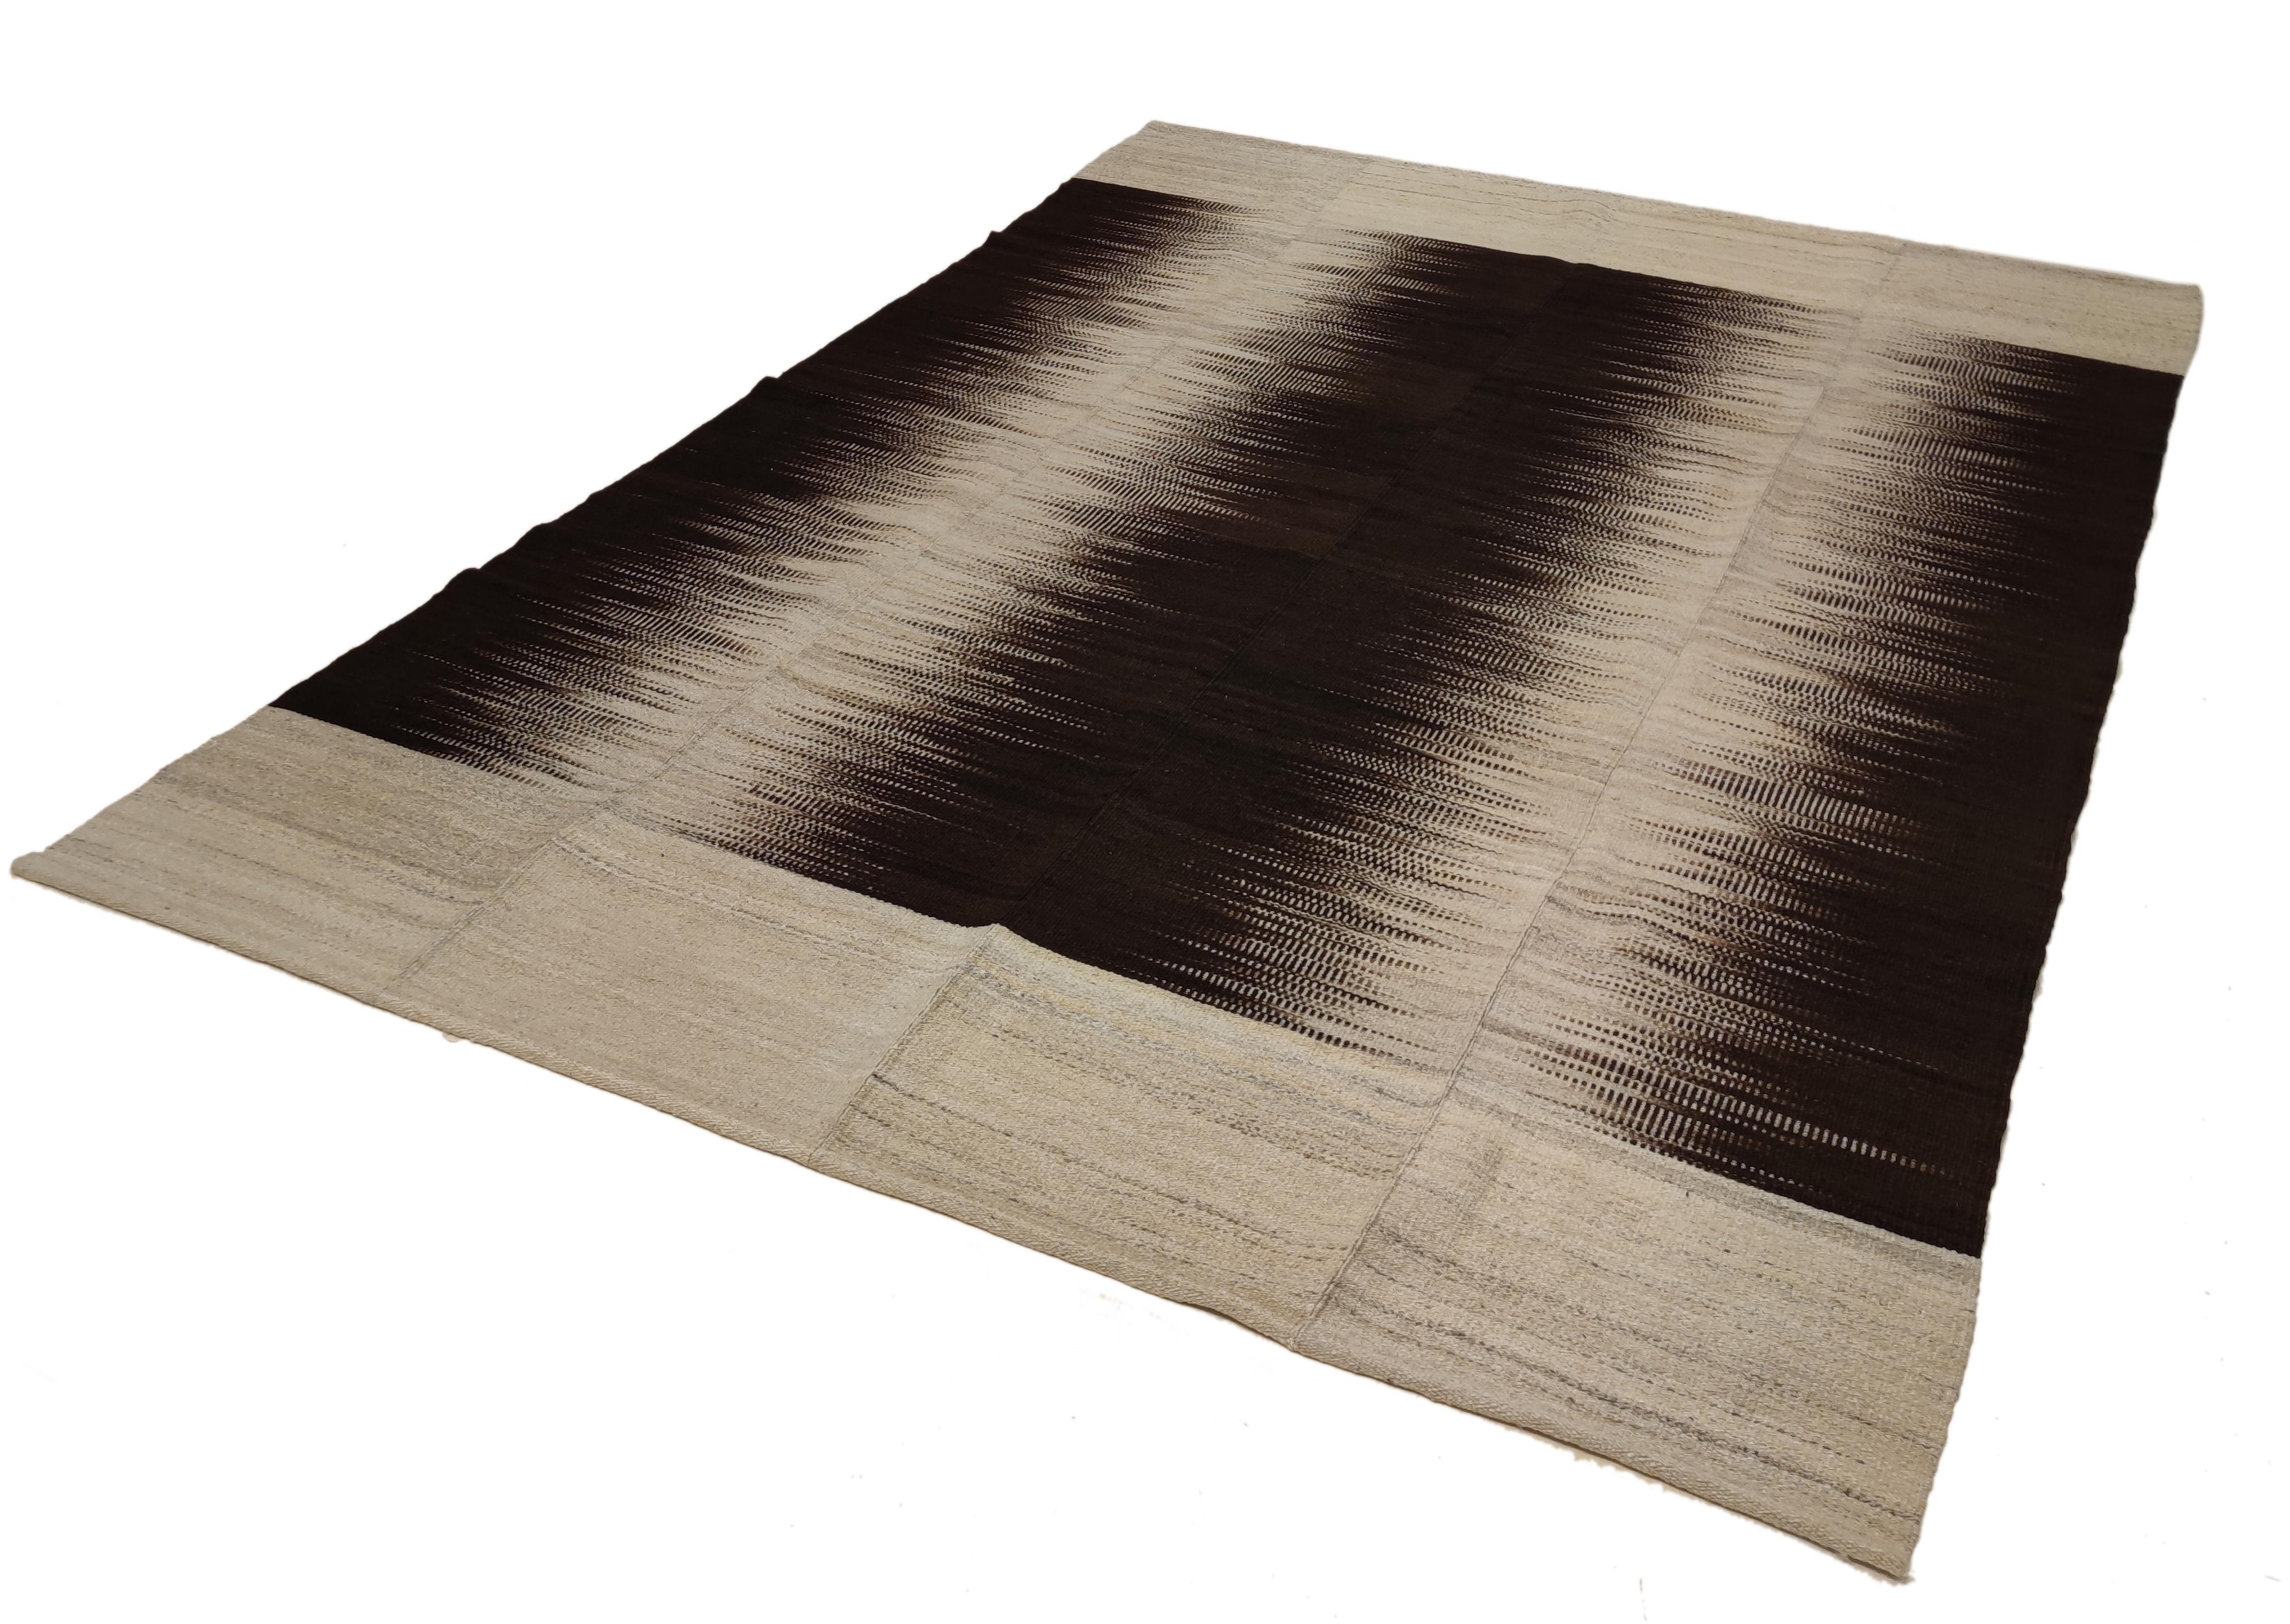 A stunning contemporary kilim from central Anatolia, woven in three panels using the best quality hand-spun wool and natural dyes. The design is inspired by the antique flat-weaves originating from the Mazandaran region, near the Caspian Sea, which